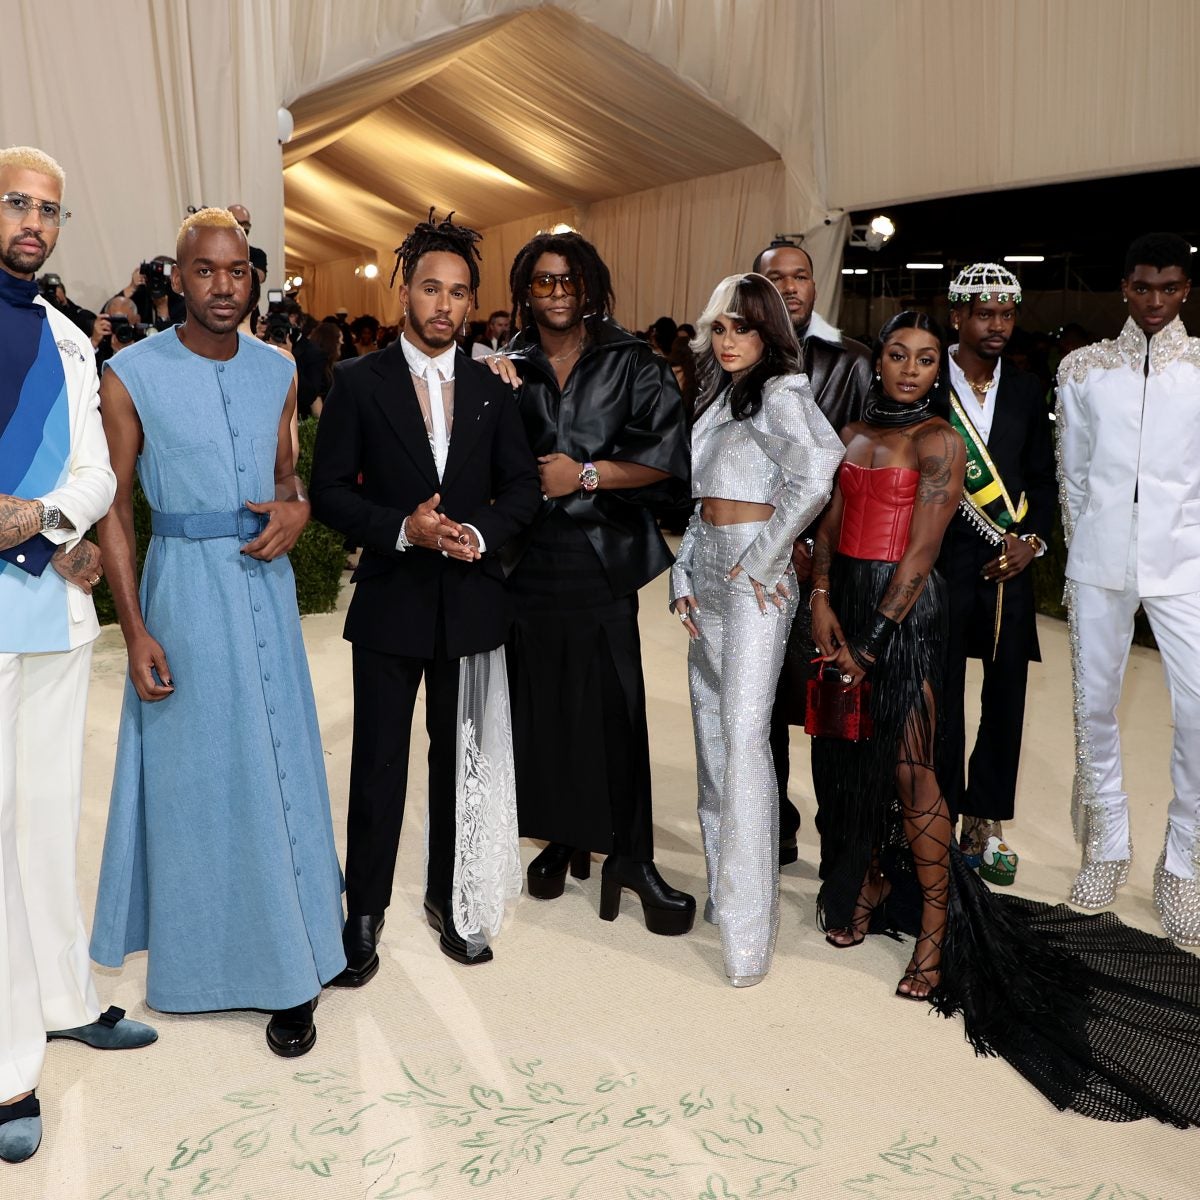 The Black Designers Nominated For The 2021 CFDA Fashion Awards - Essence